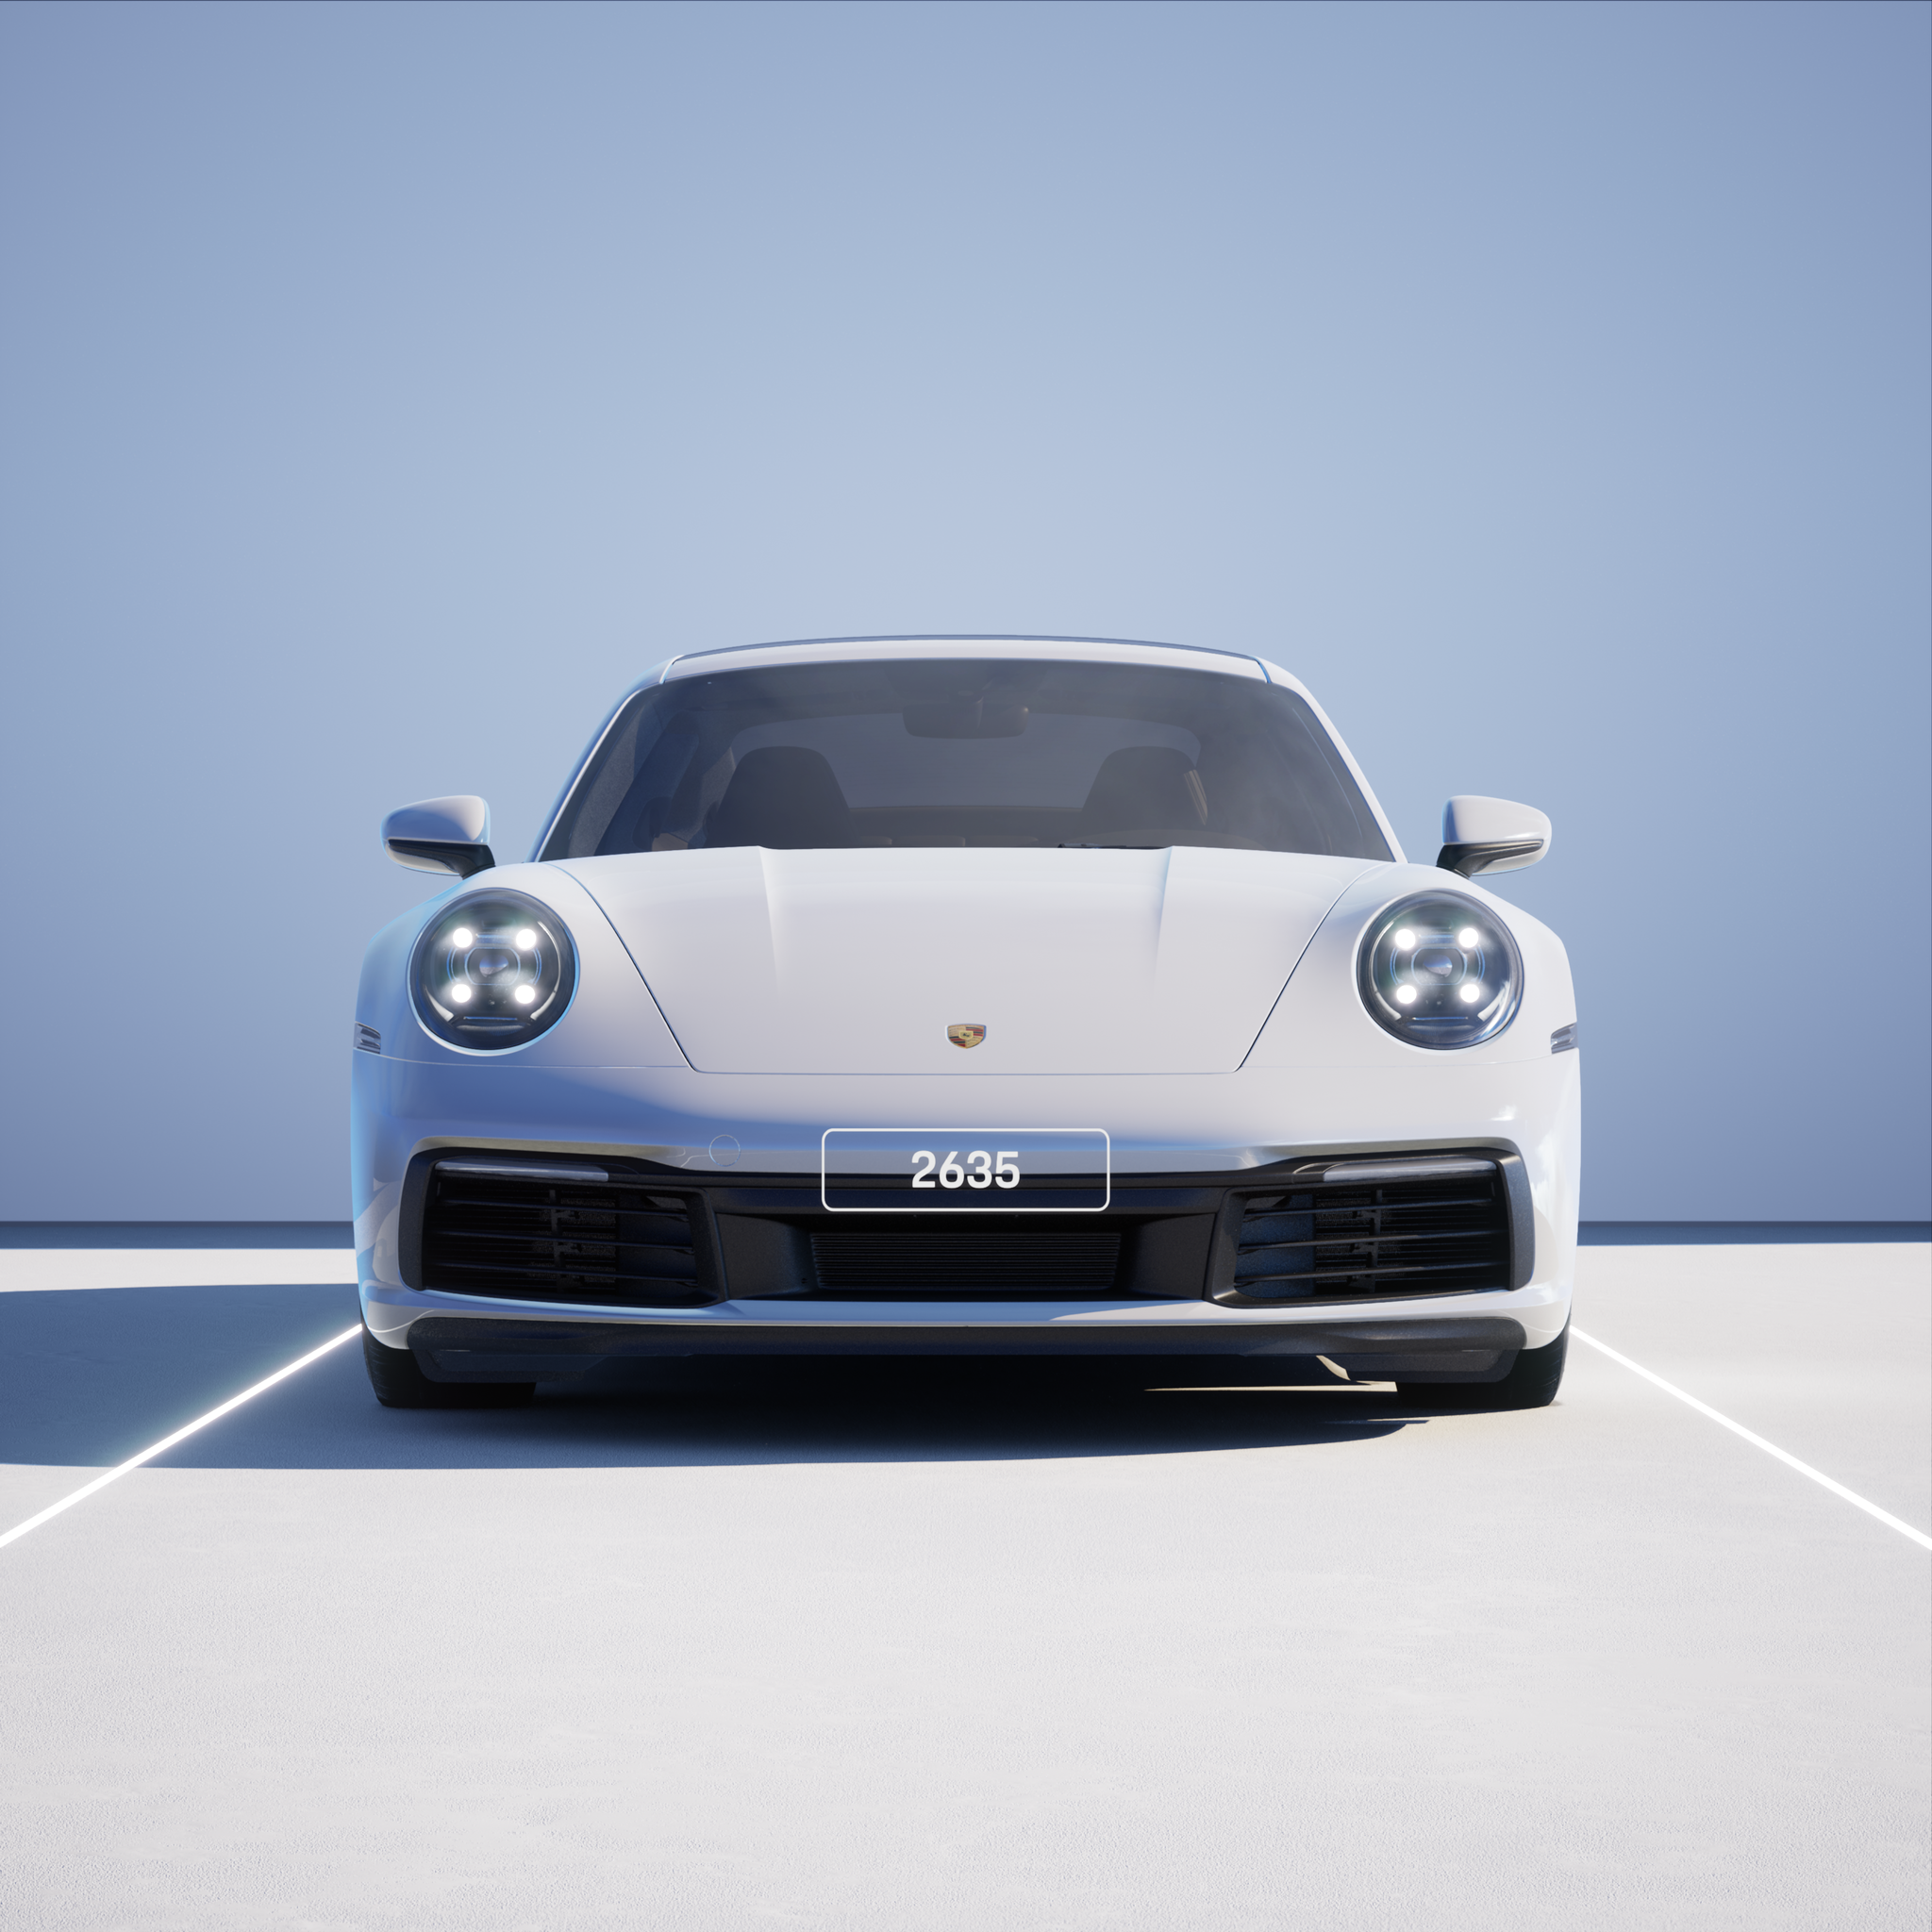 The PORSCHΞ 911 2635 image in phase